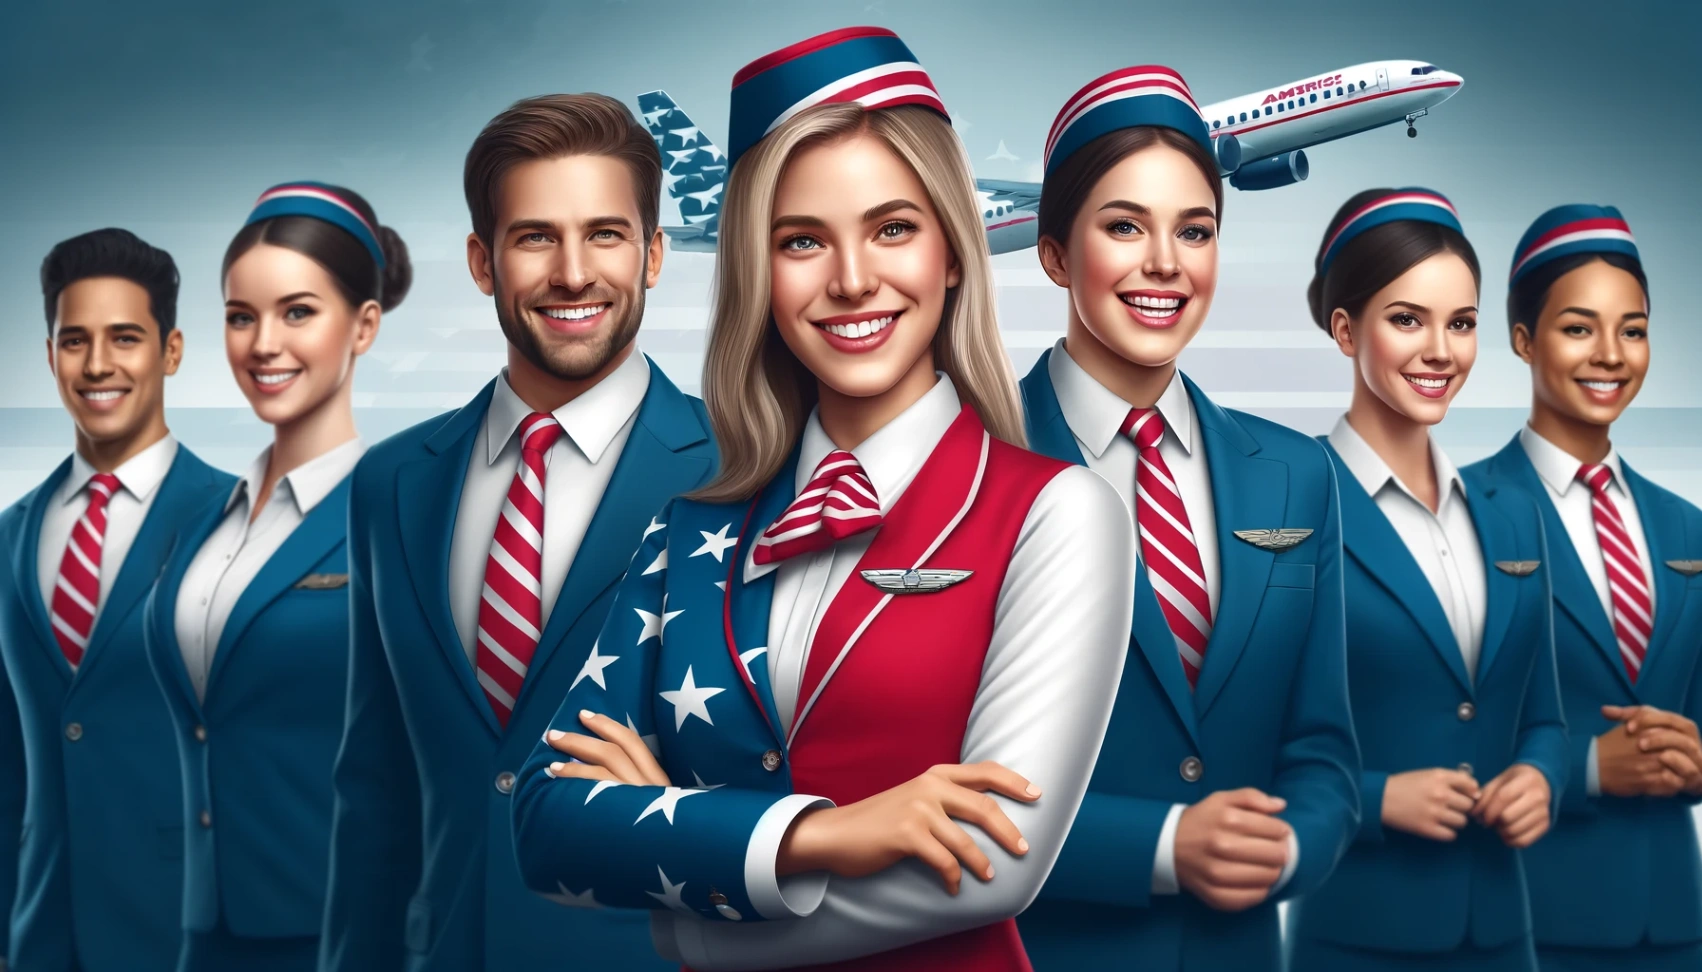 American Airlines Job Openings: Learn How to Easily Apply